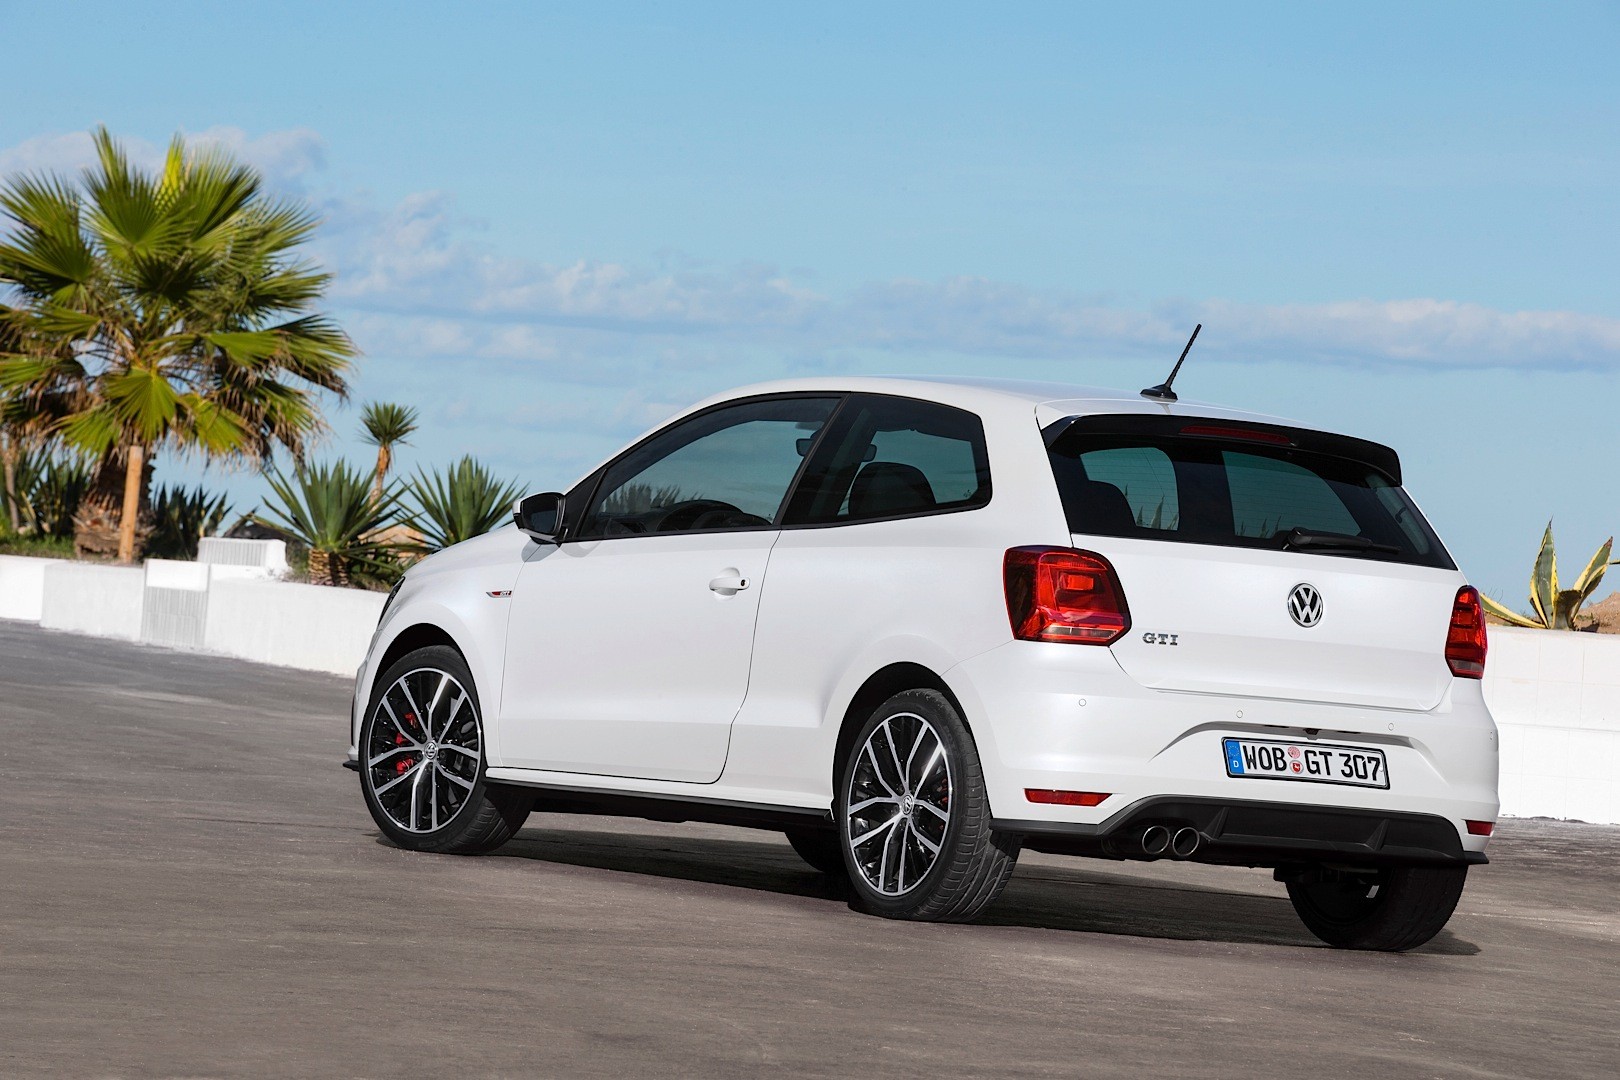 2015 Volkswagen Polo GTI (6R Facelift): New Photos and Details Released ...